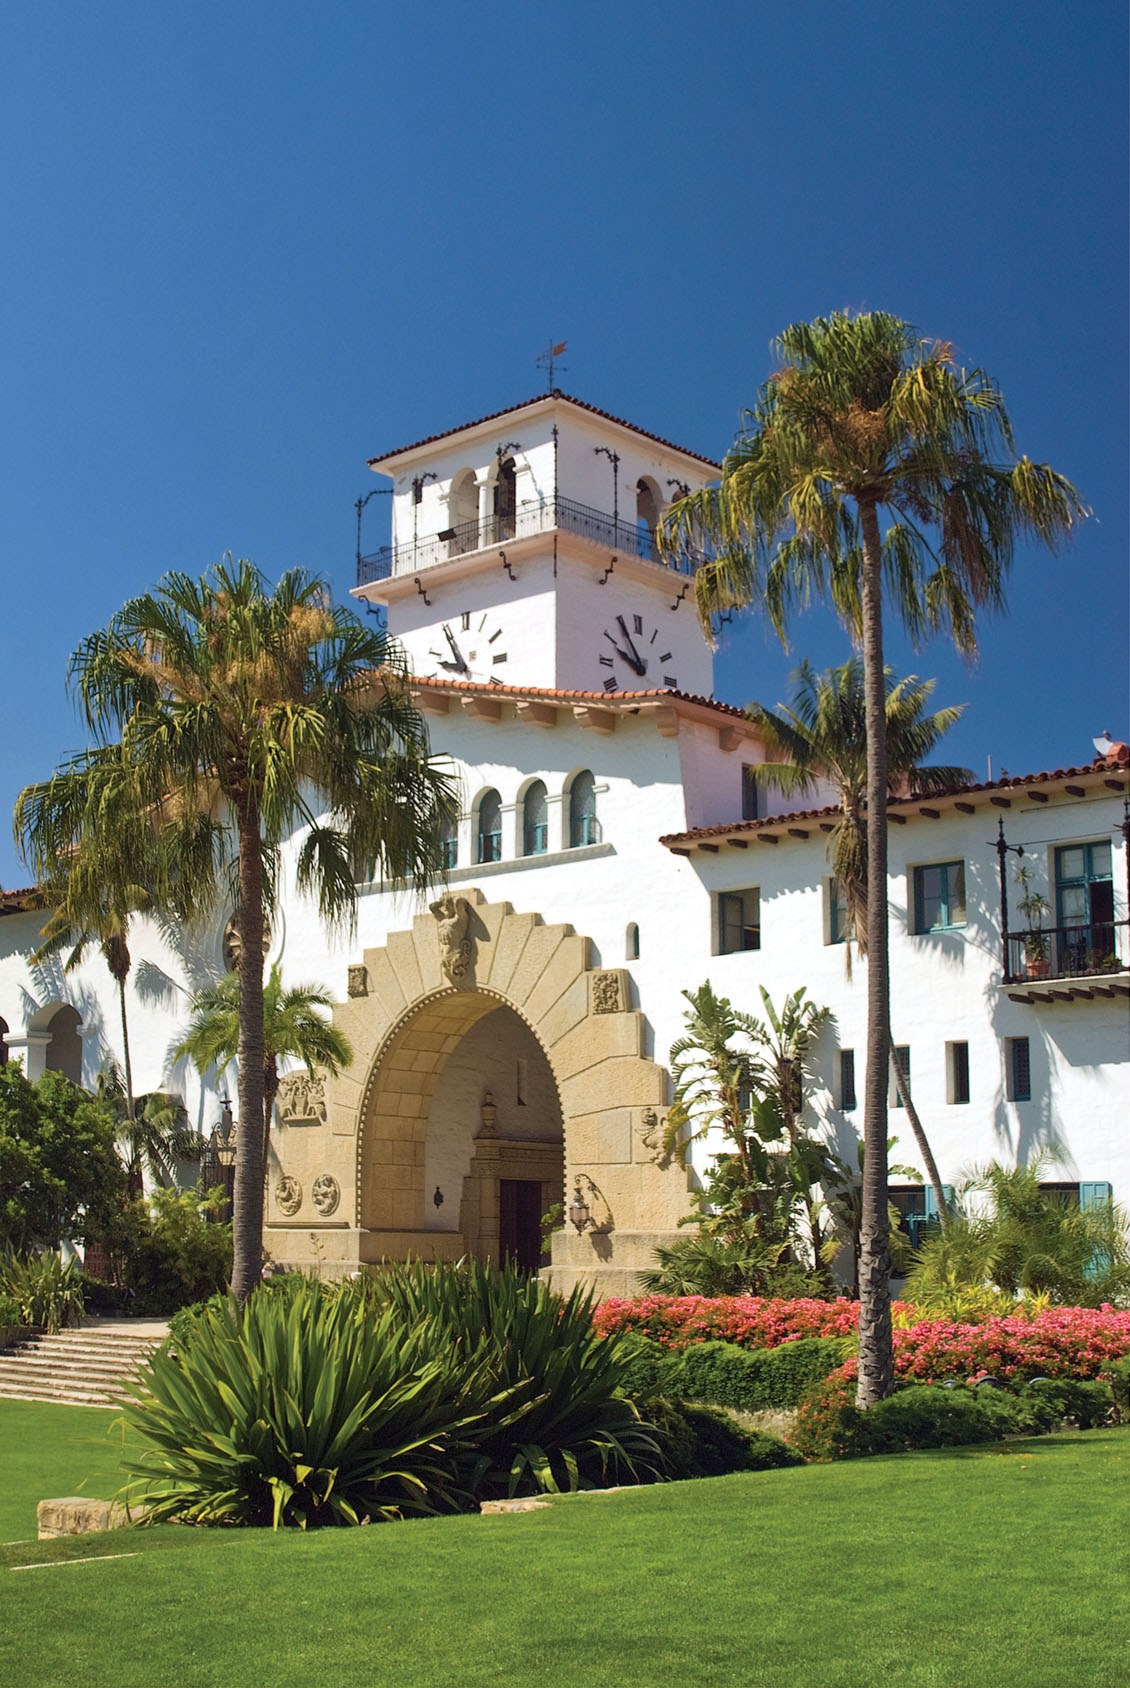 Spanish Colonial Revival–style architecture